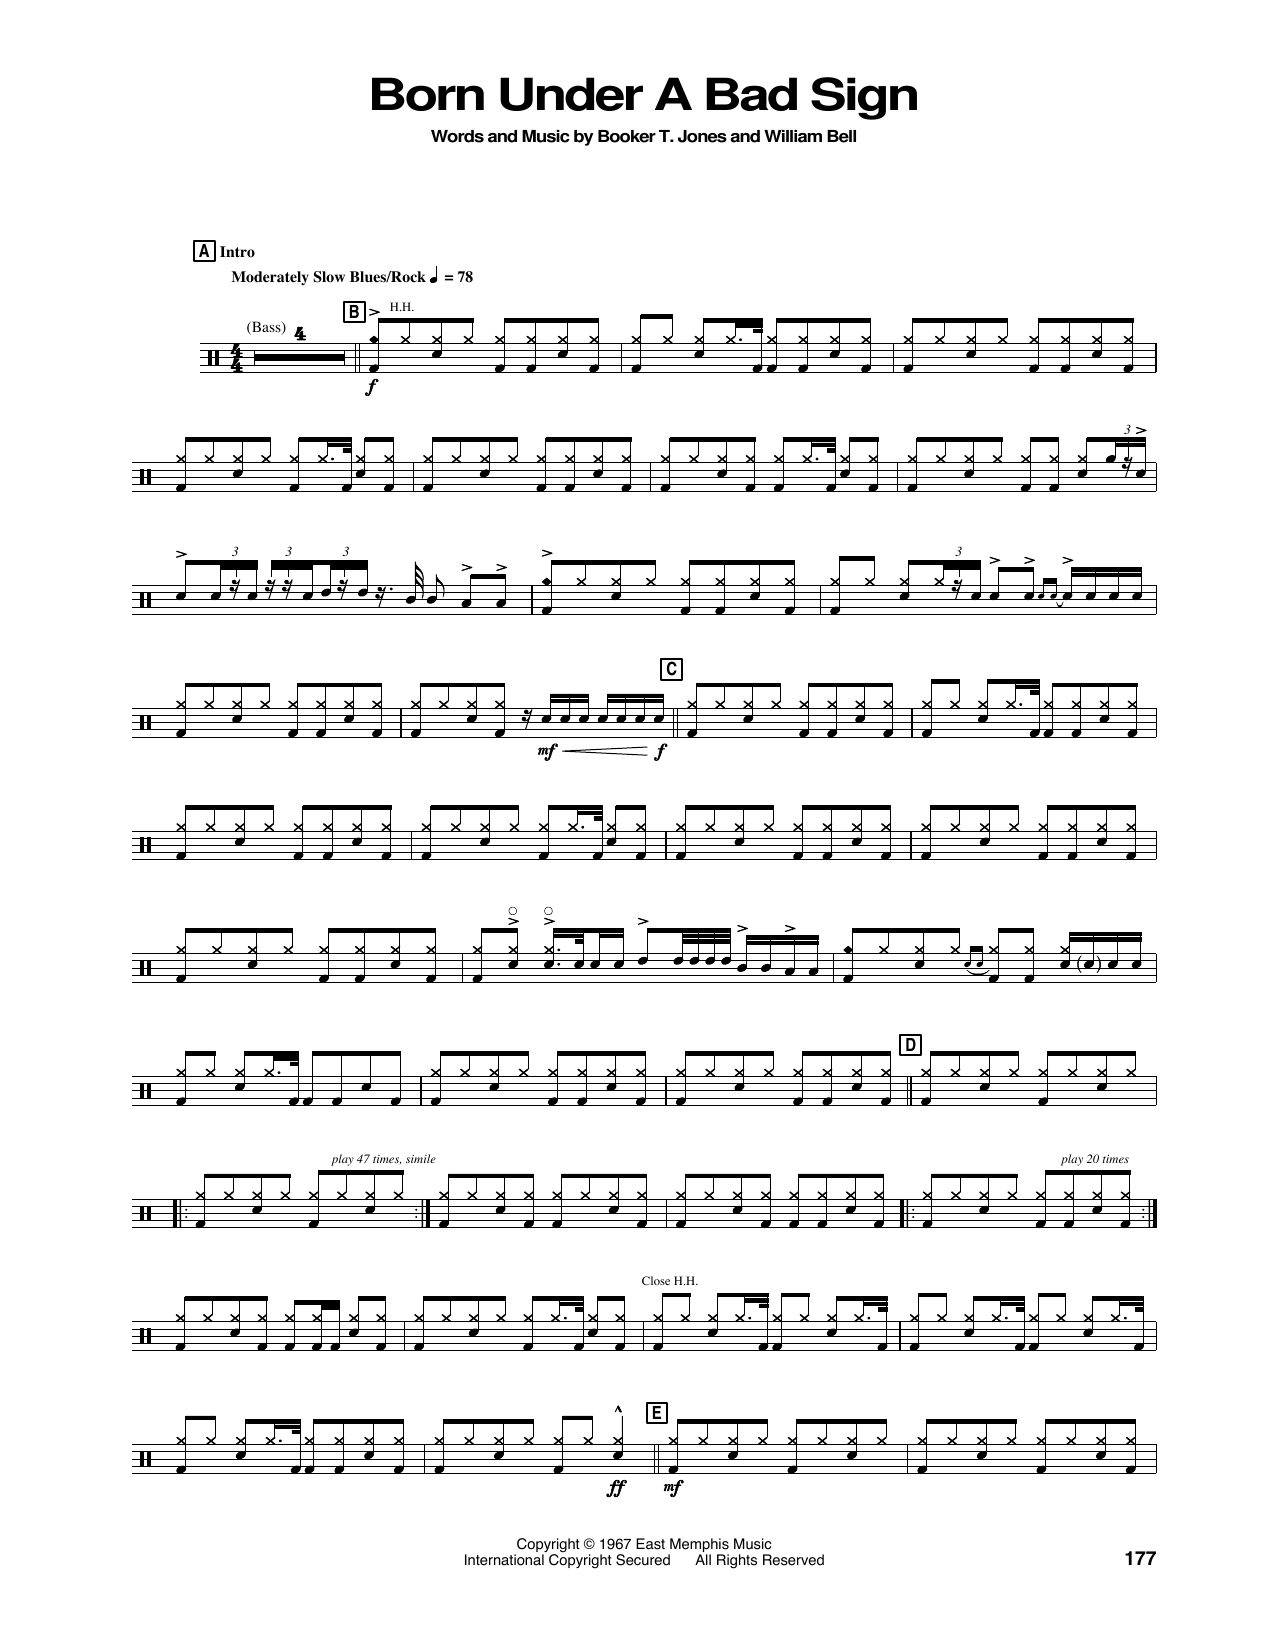 Albert King Born Under A Bad Sign sheet music notes and chords. Download Printable PDF.